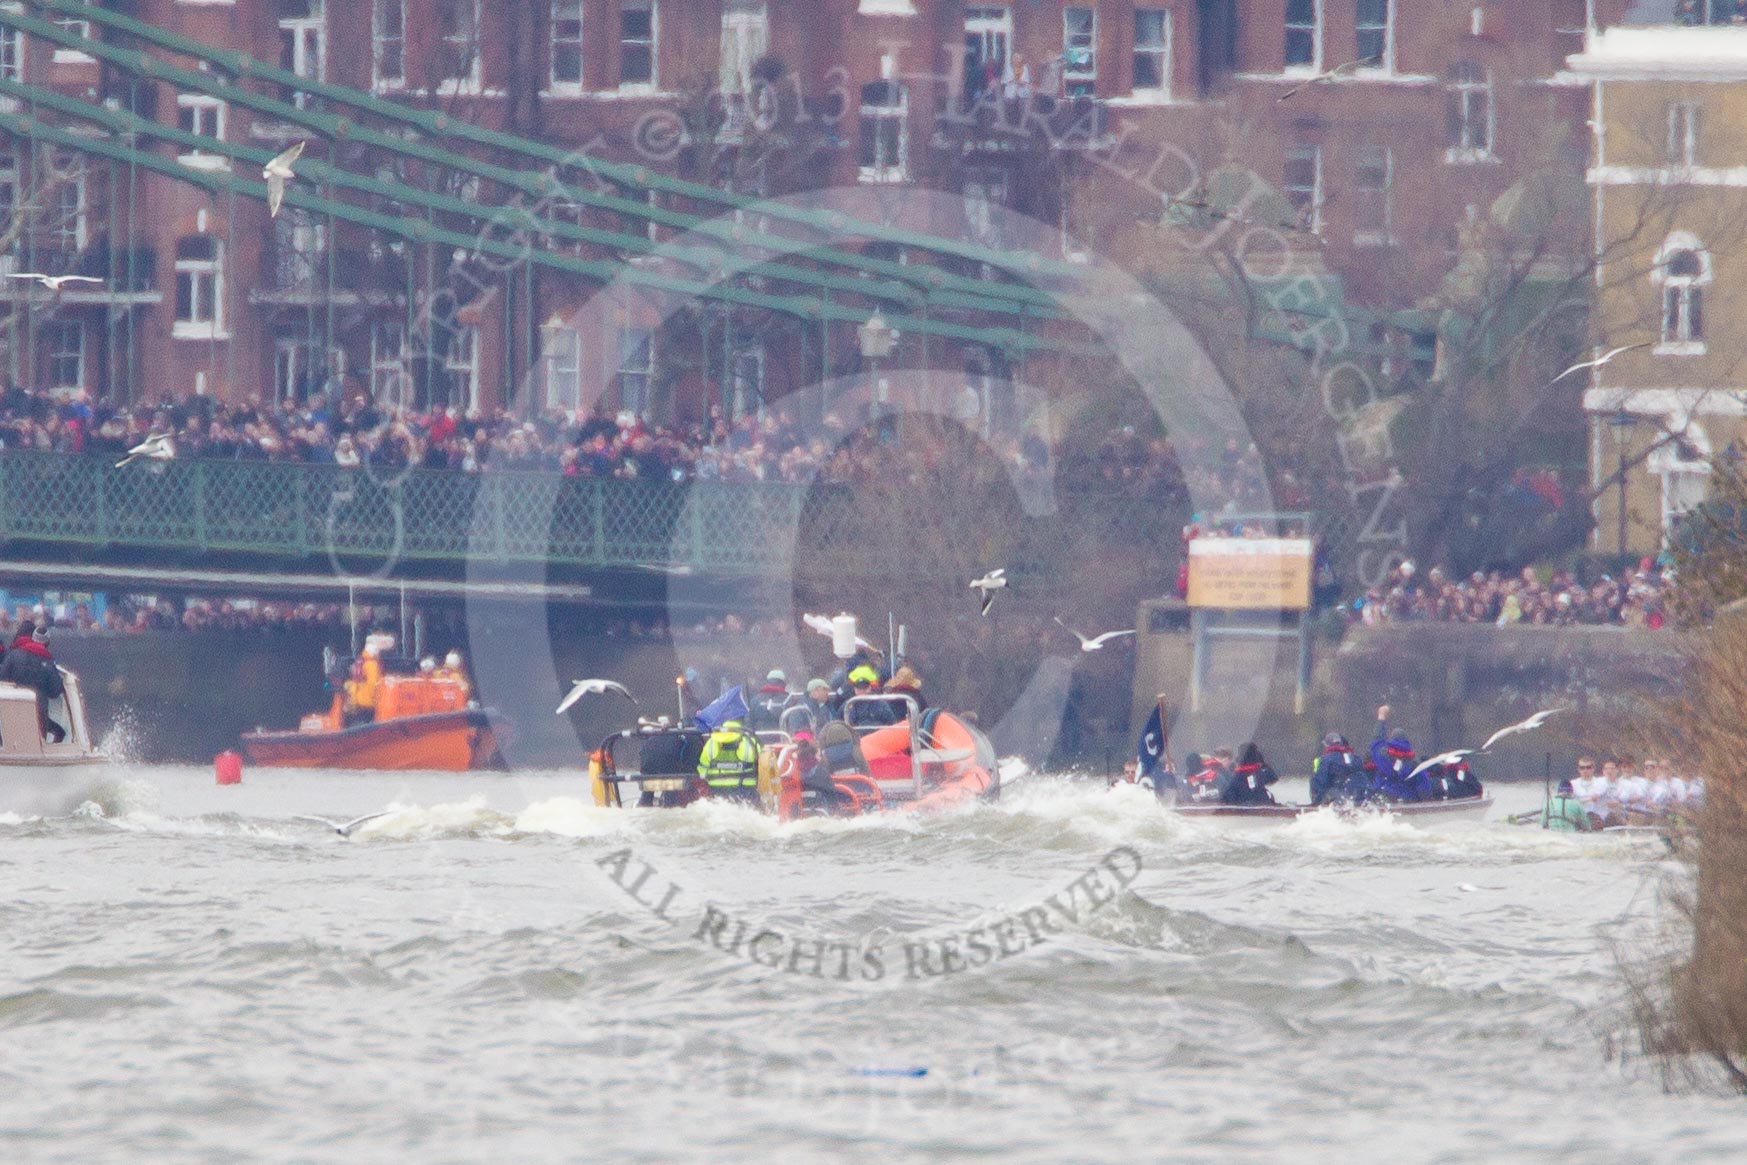 The Boat Race 2013.
Putney,
London SW15,

United Kingdom,
on 31 March 2013 at 16:35, image #338